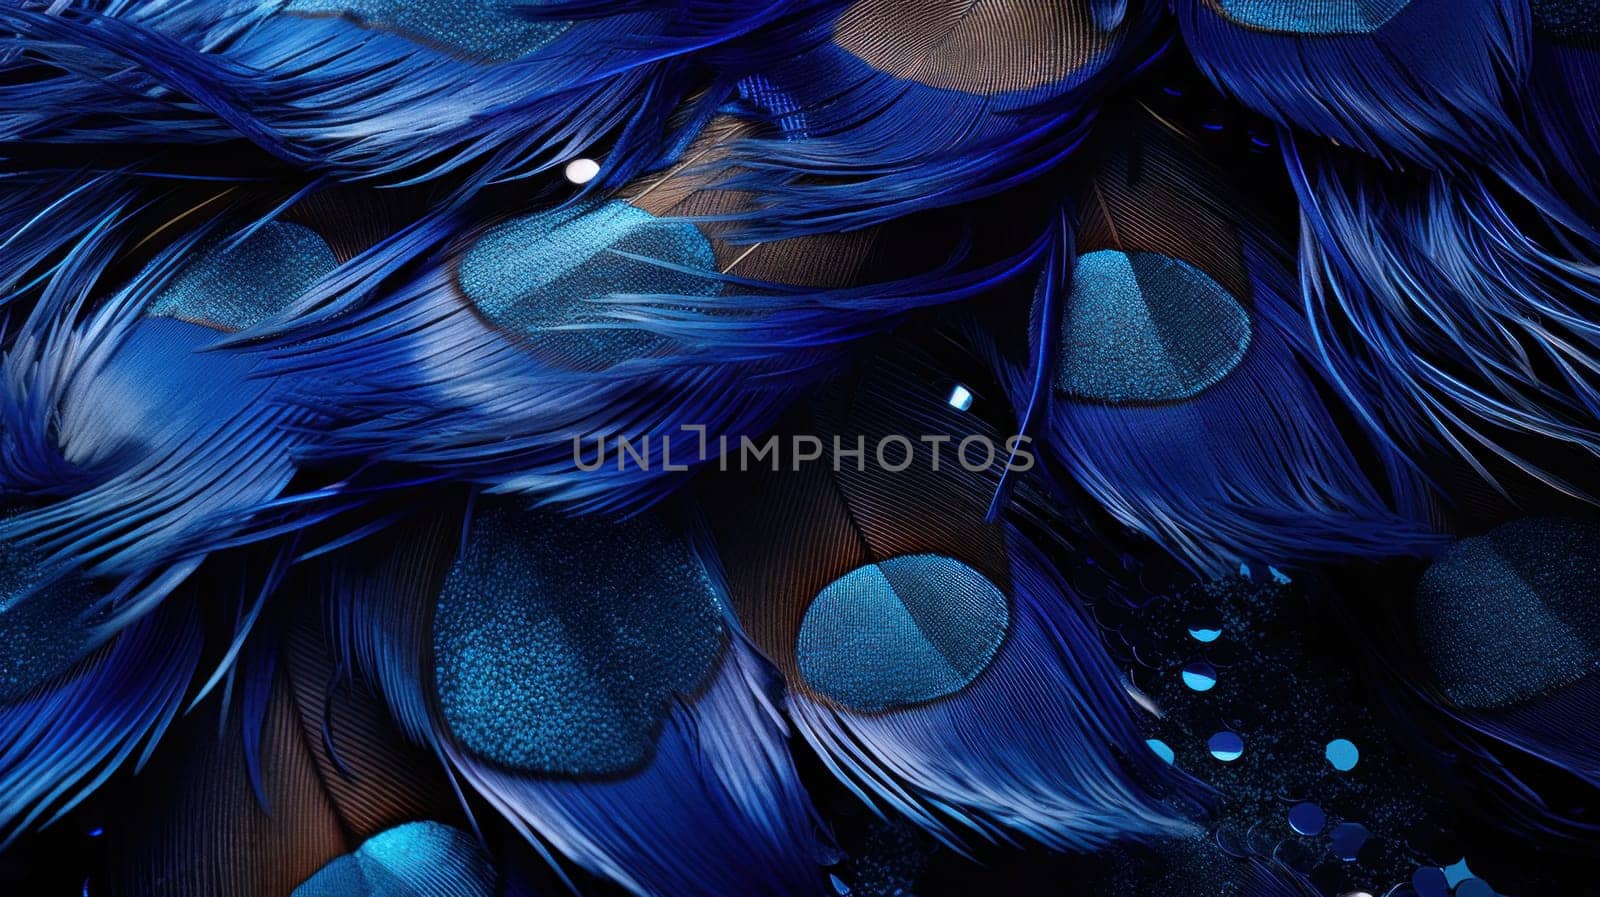 A close up of a blue and black feathery display, AI by starush